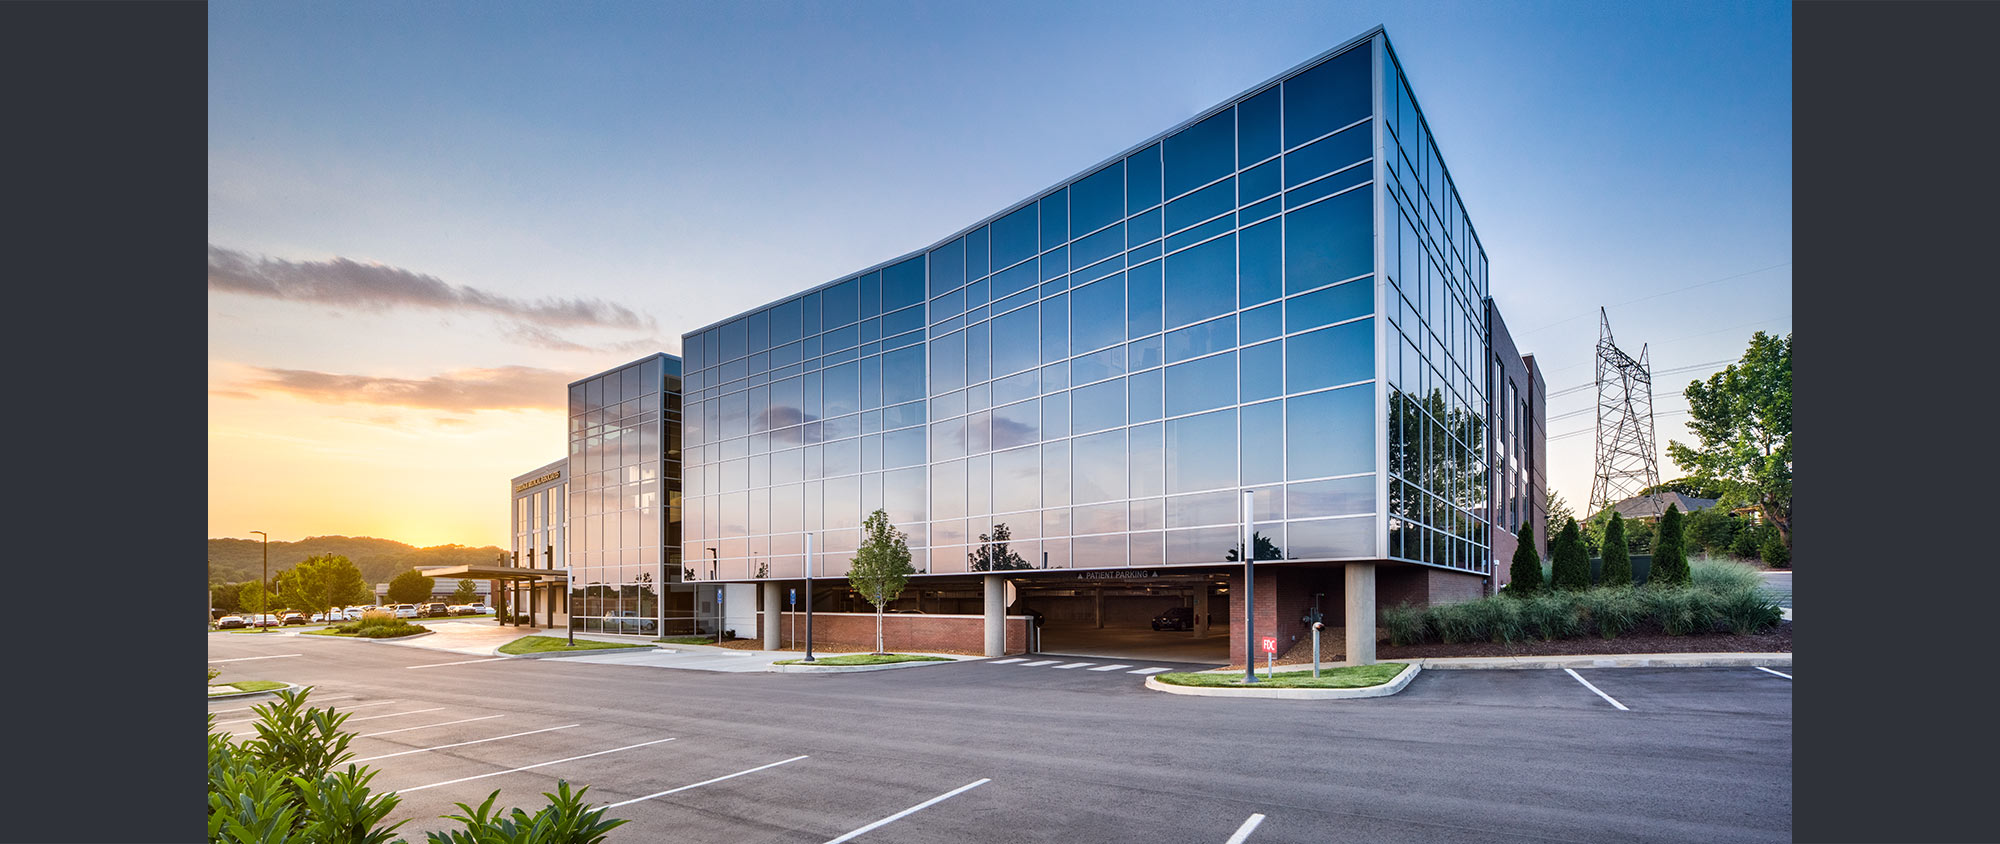 Heritage Medical Associates Medical Office Building / Clinic